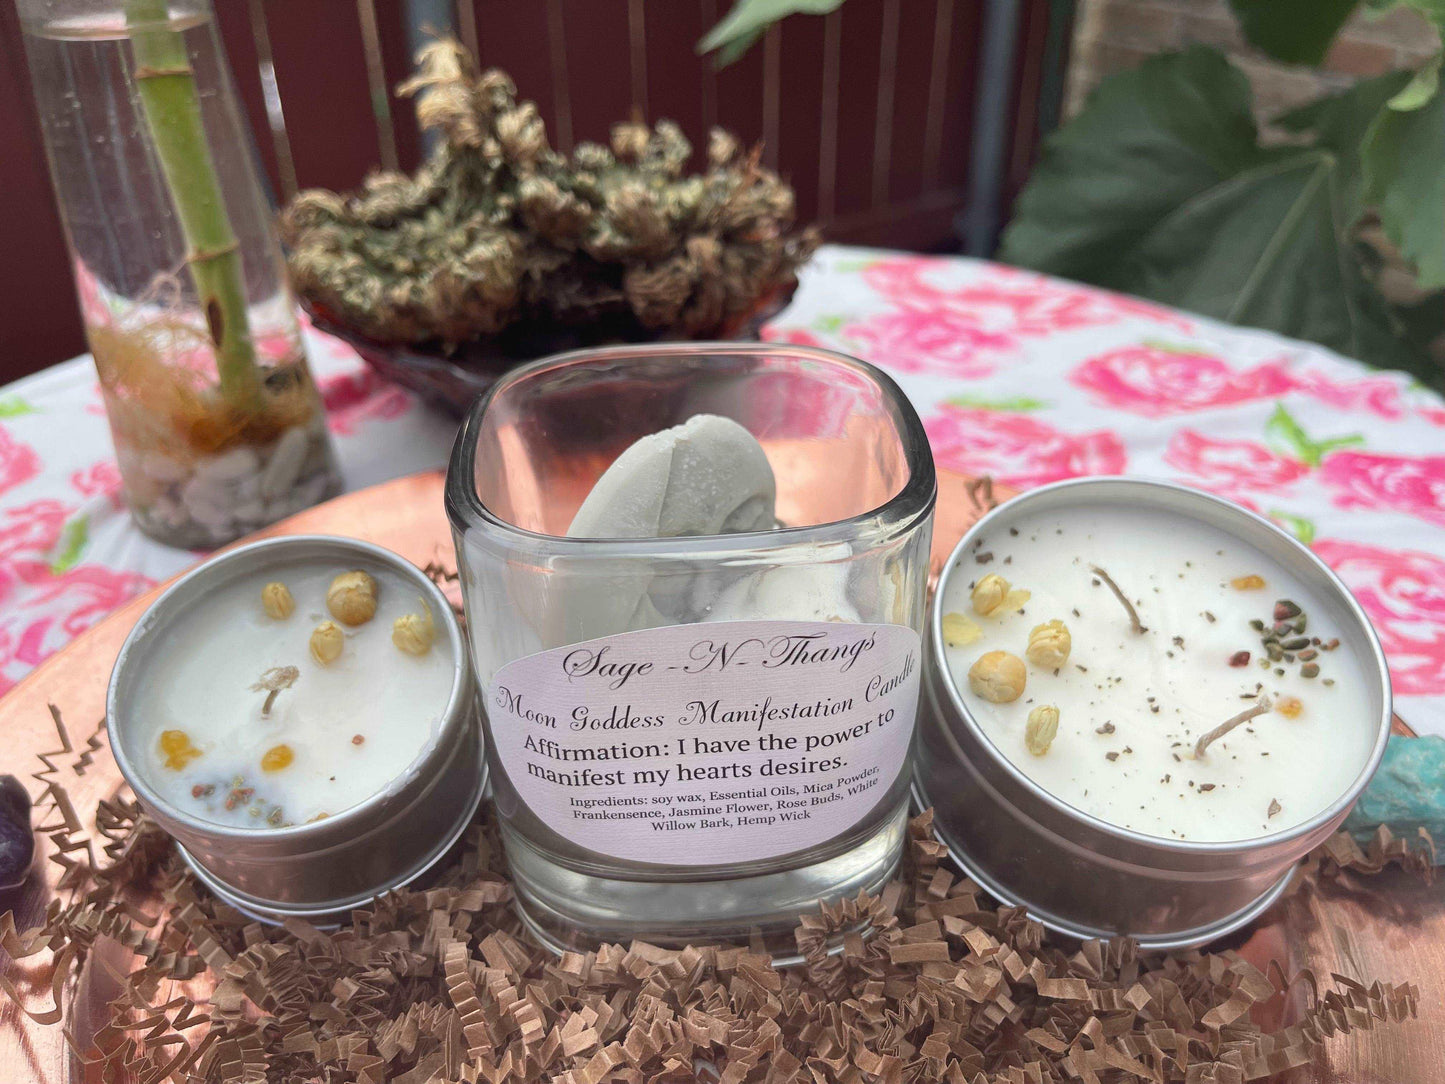 Moon Goddess Manifestation Candle by Sage N Thangs